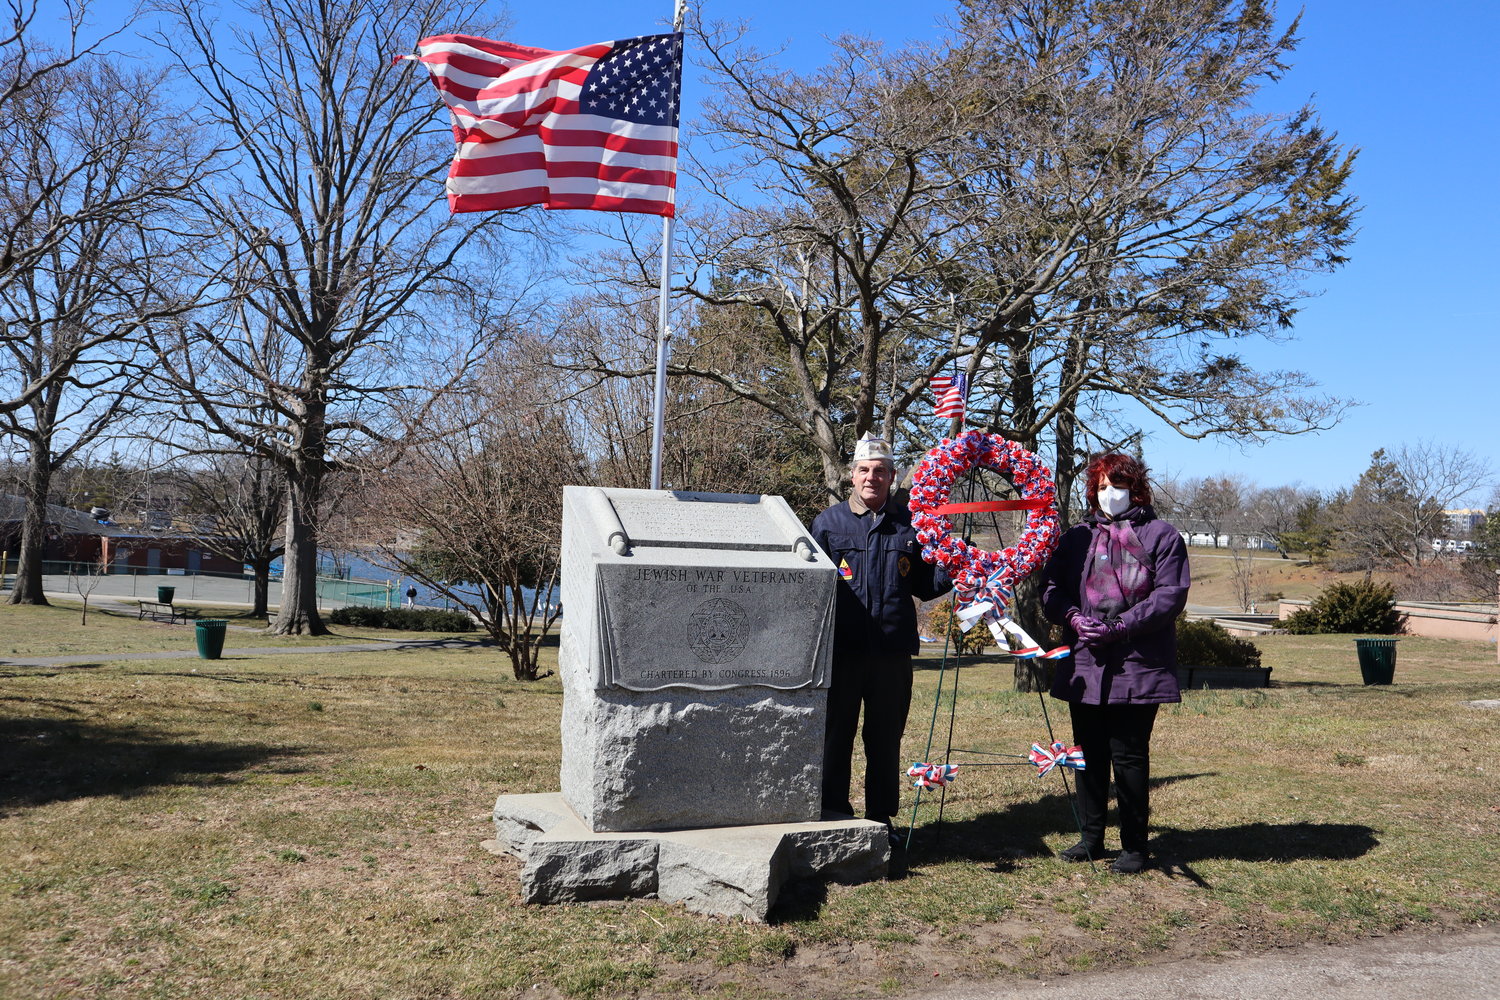 Glick and Renee Taback presented a wreath at the Jewish War Veterans Memorial in Eisenhower Park. Taback’s father, a Jewish veteran, designed the memorial.